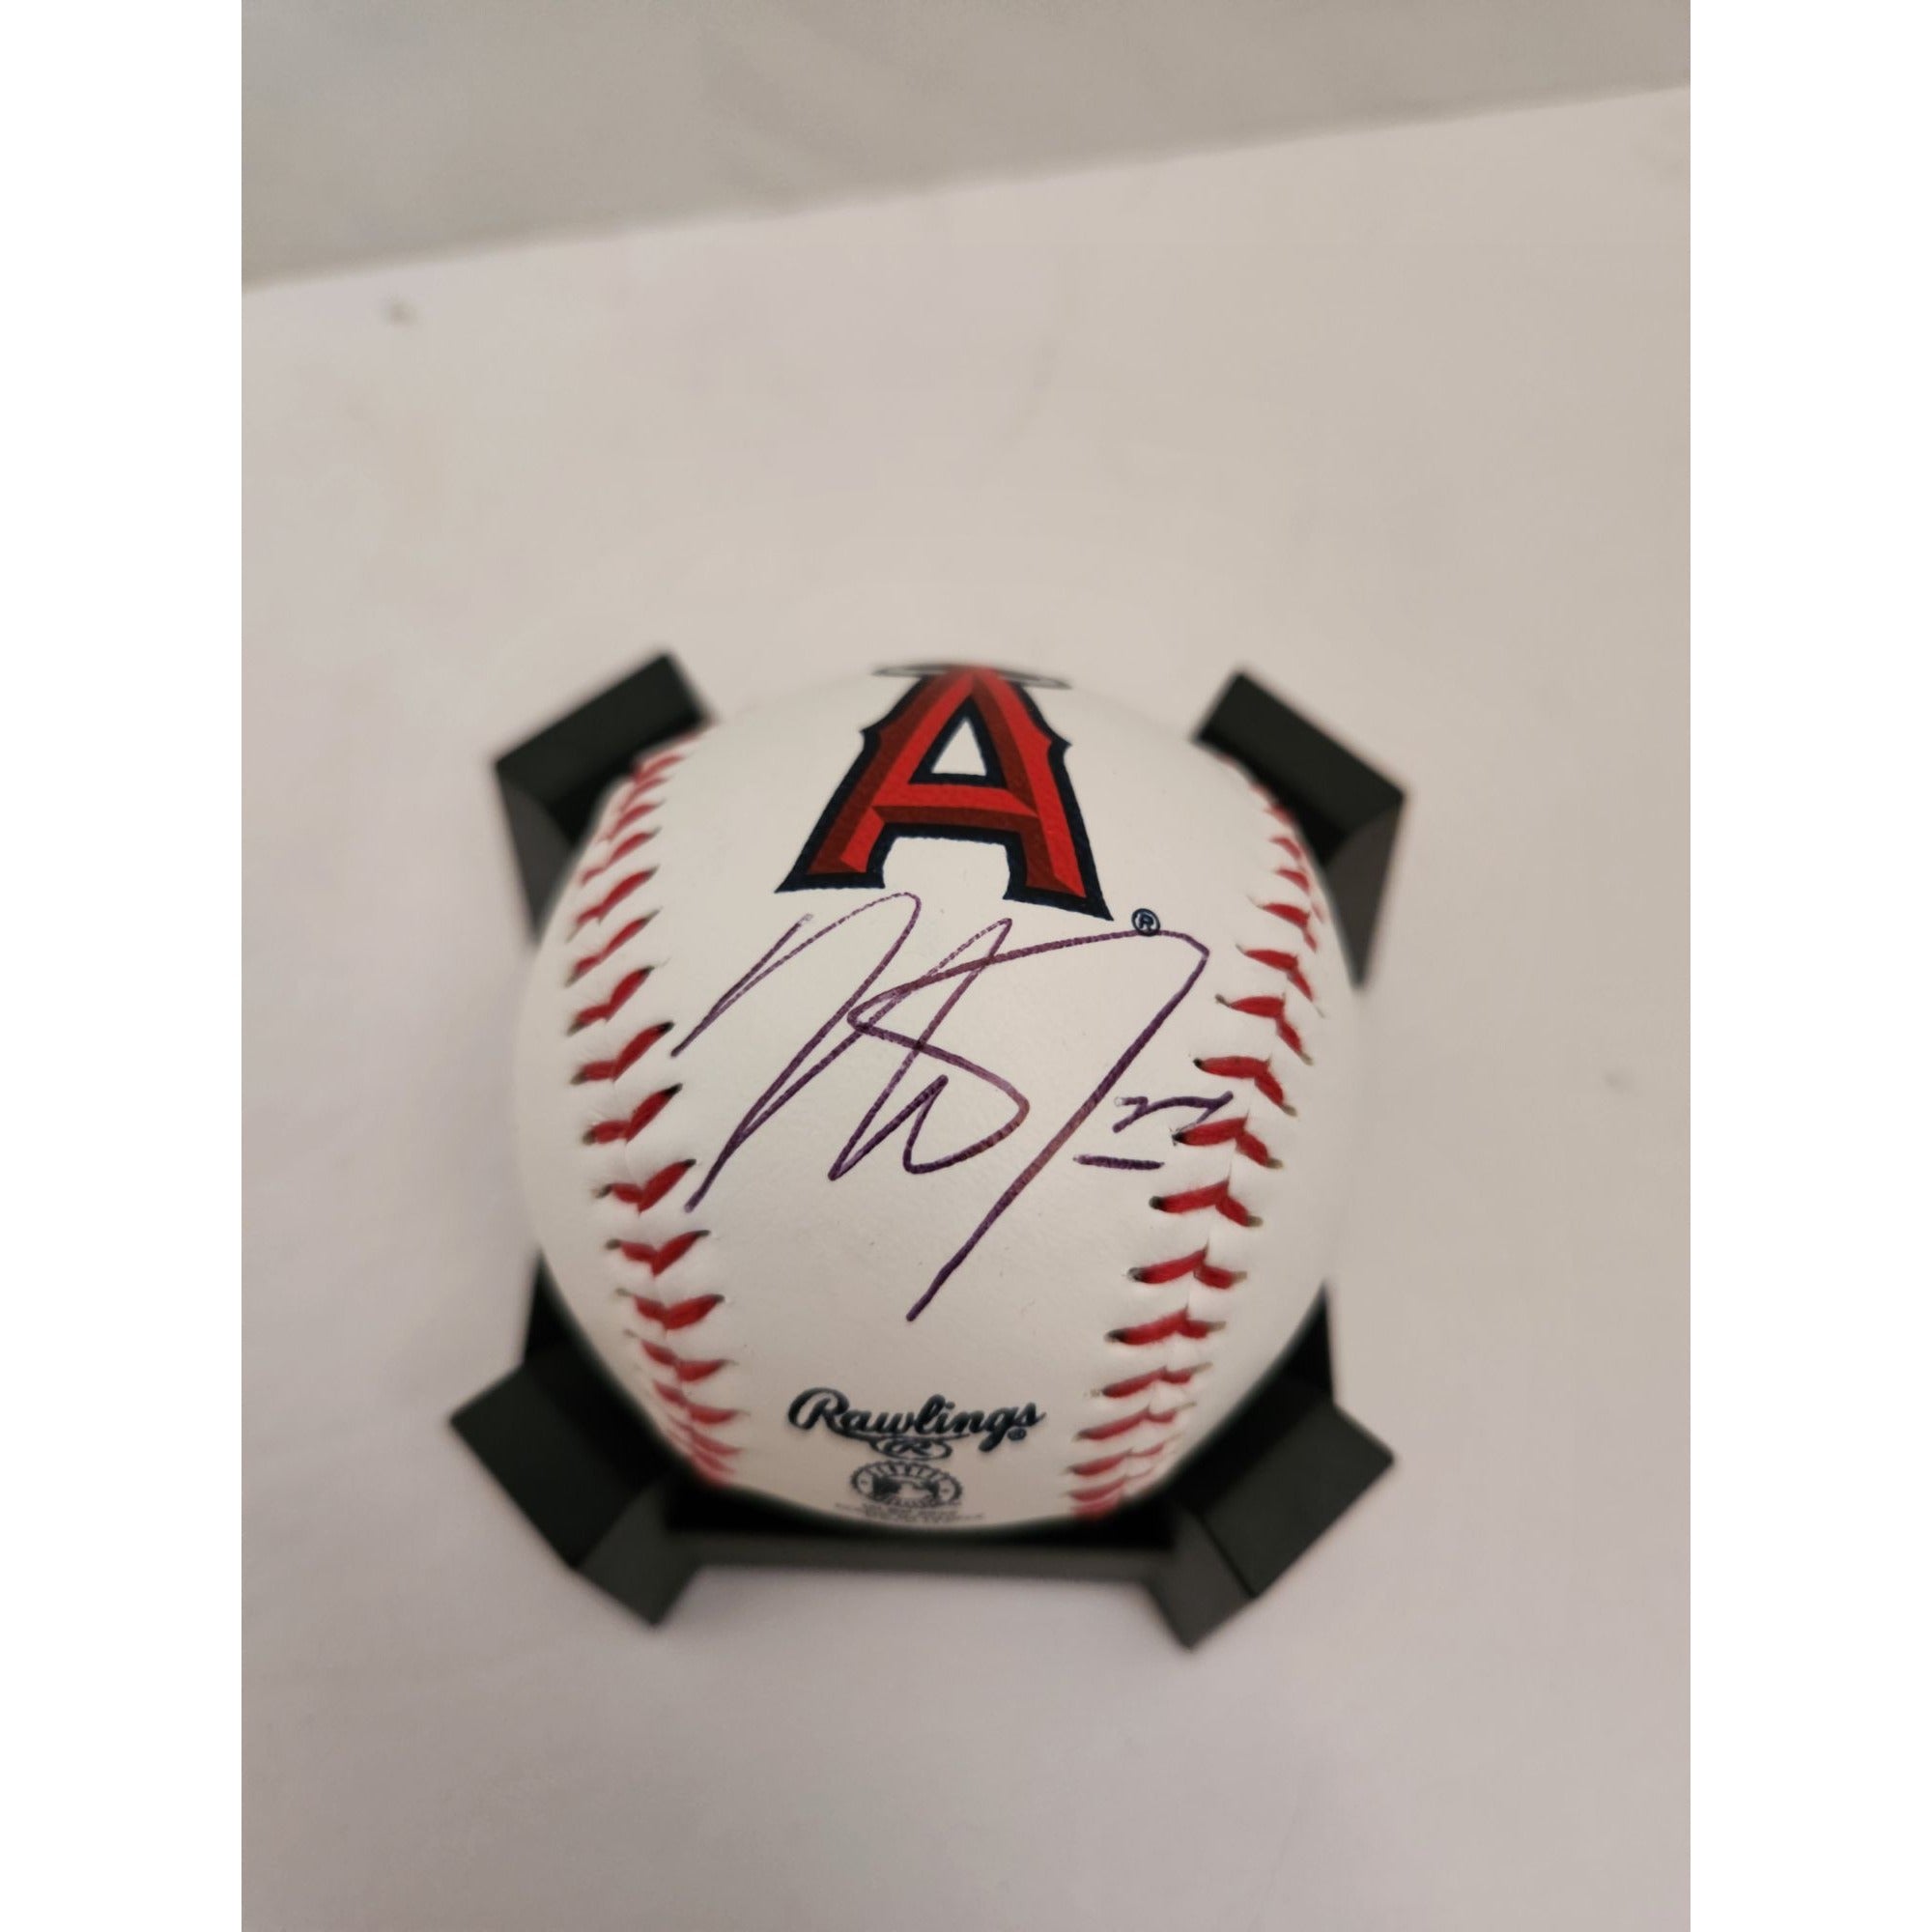 Mike Trout California Angels Rawlings Baseball signed with proof free acrylic display case